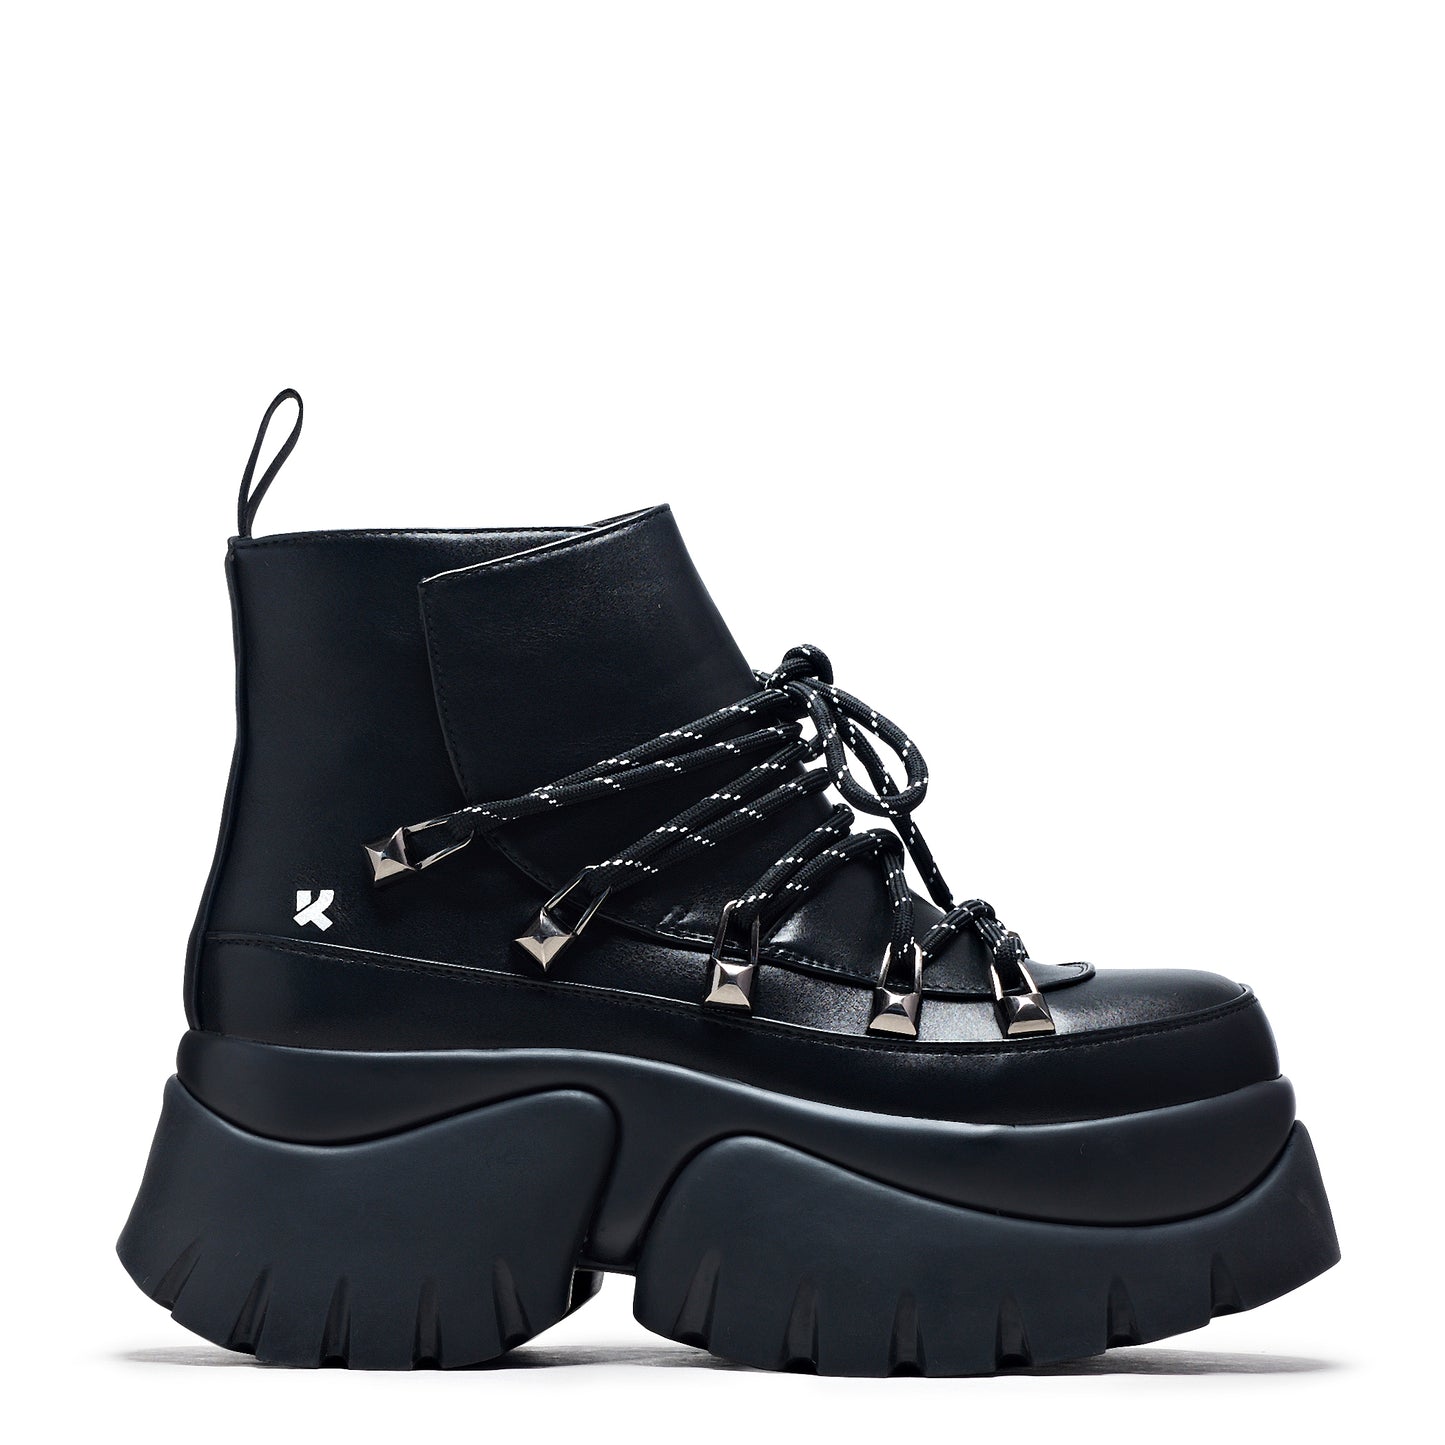 Sigmar Chunky Hiking Boots - Ankle Boots - KOI Footwear - Black - Side View